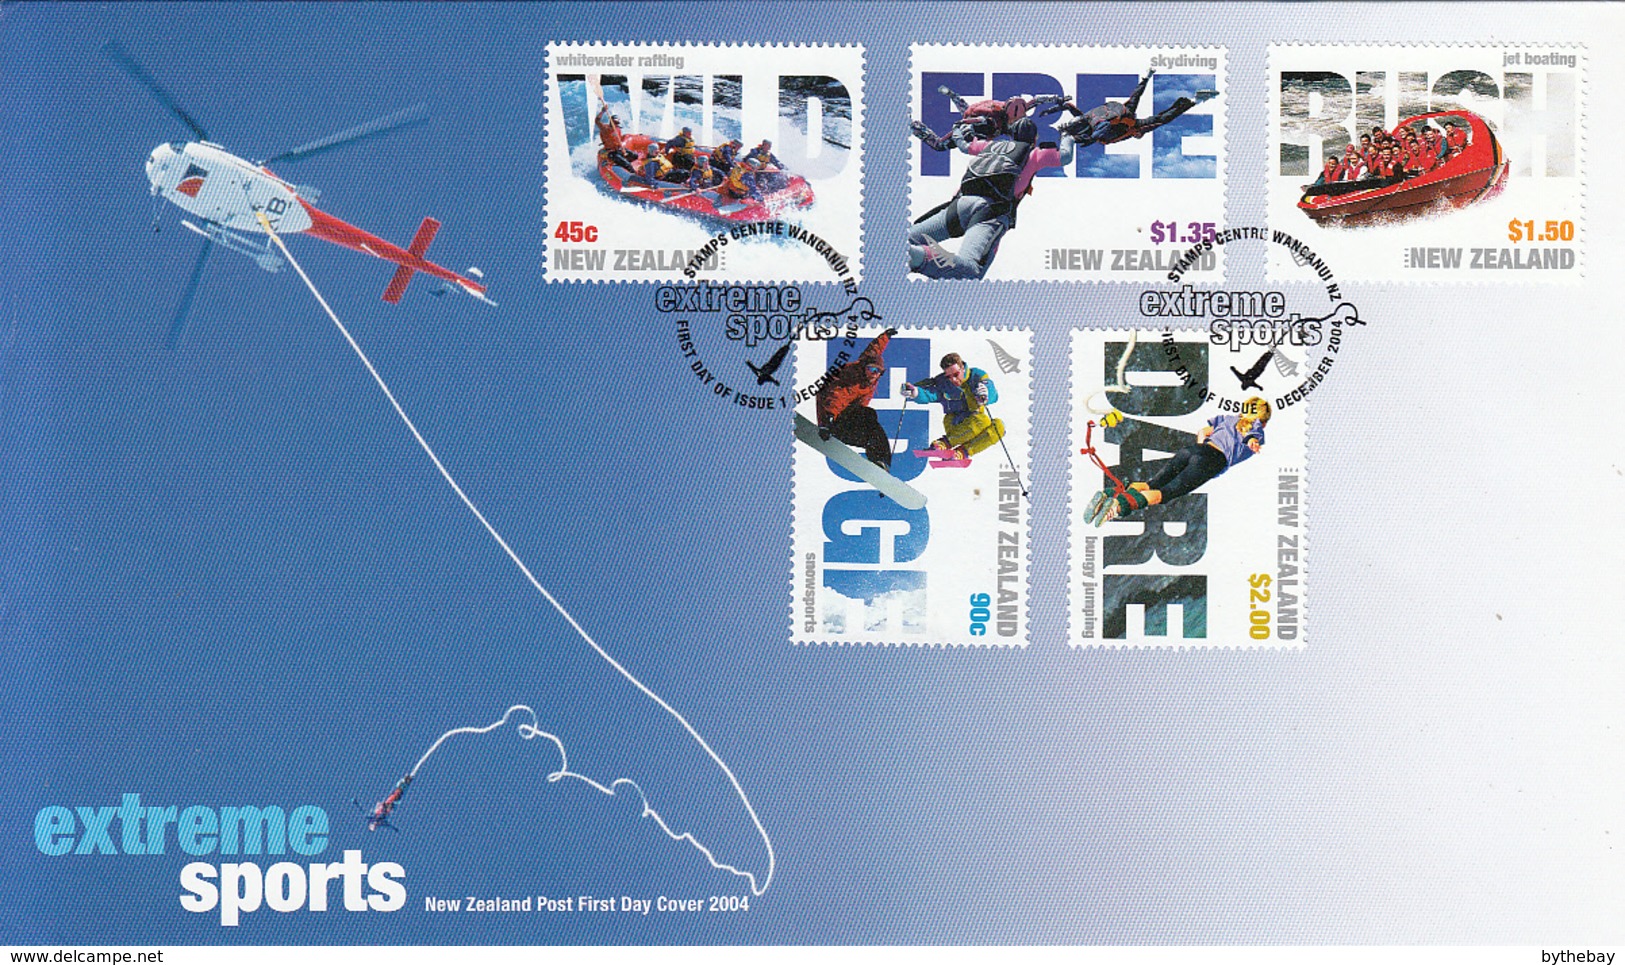 New Zealand 2004 FDC Scott #1986-#1990 Extreme Sports Whitewater Rafting, Bungy, Snowsports, Jetboat, Skydiving - FDC